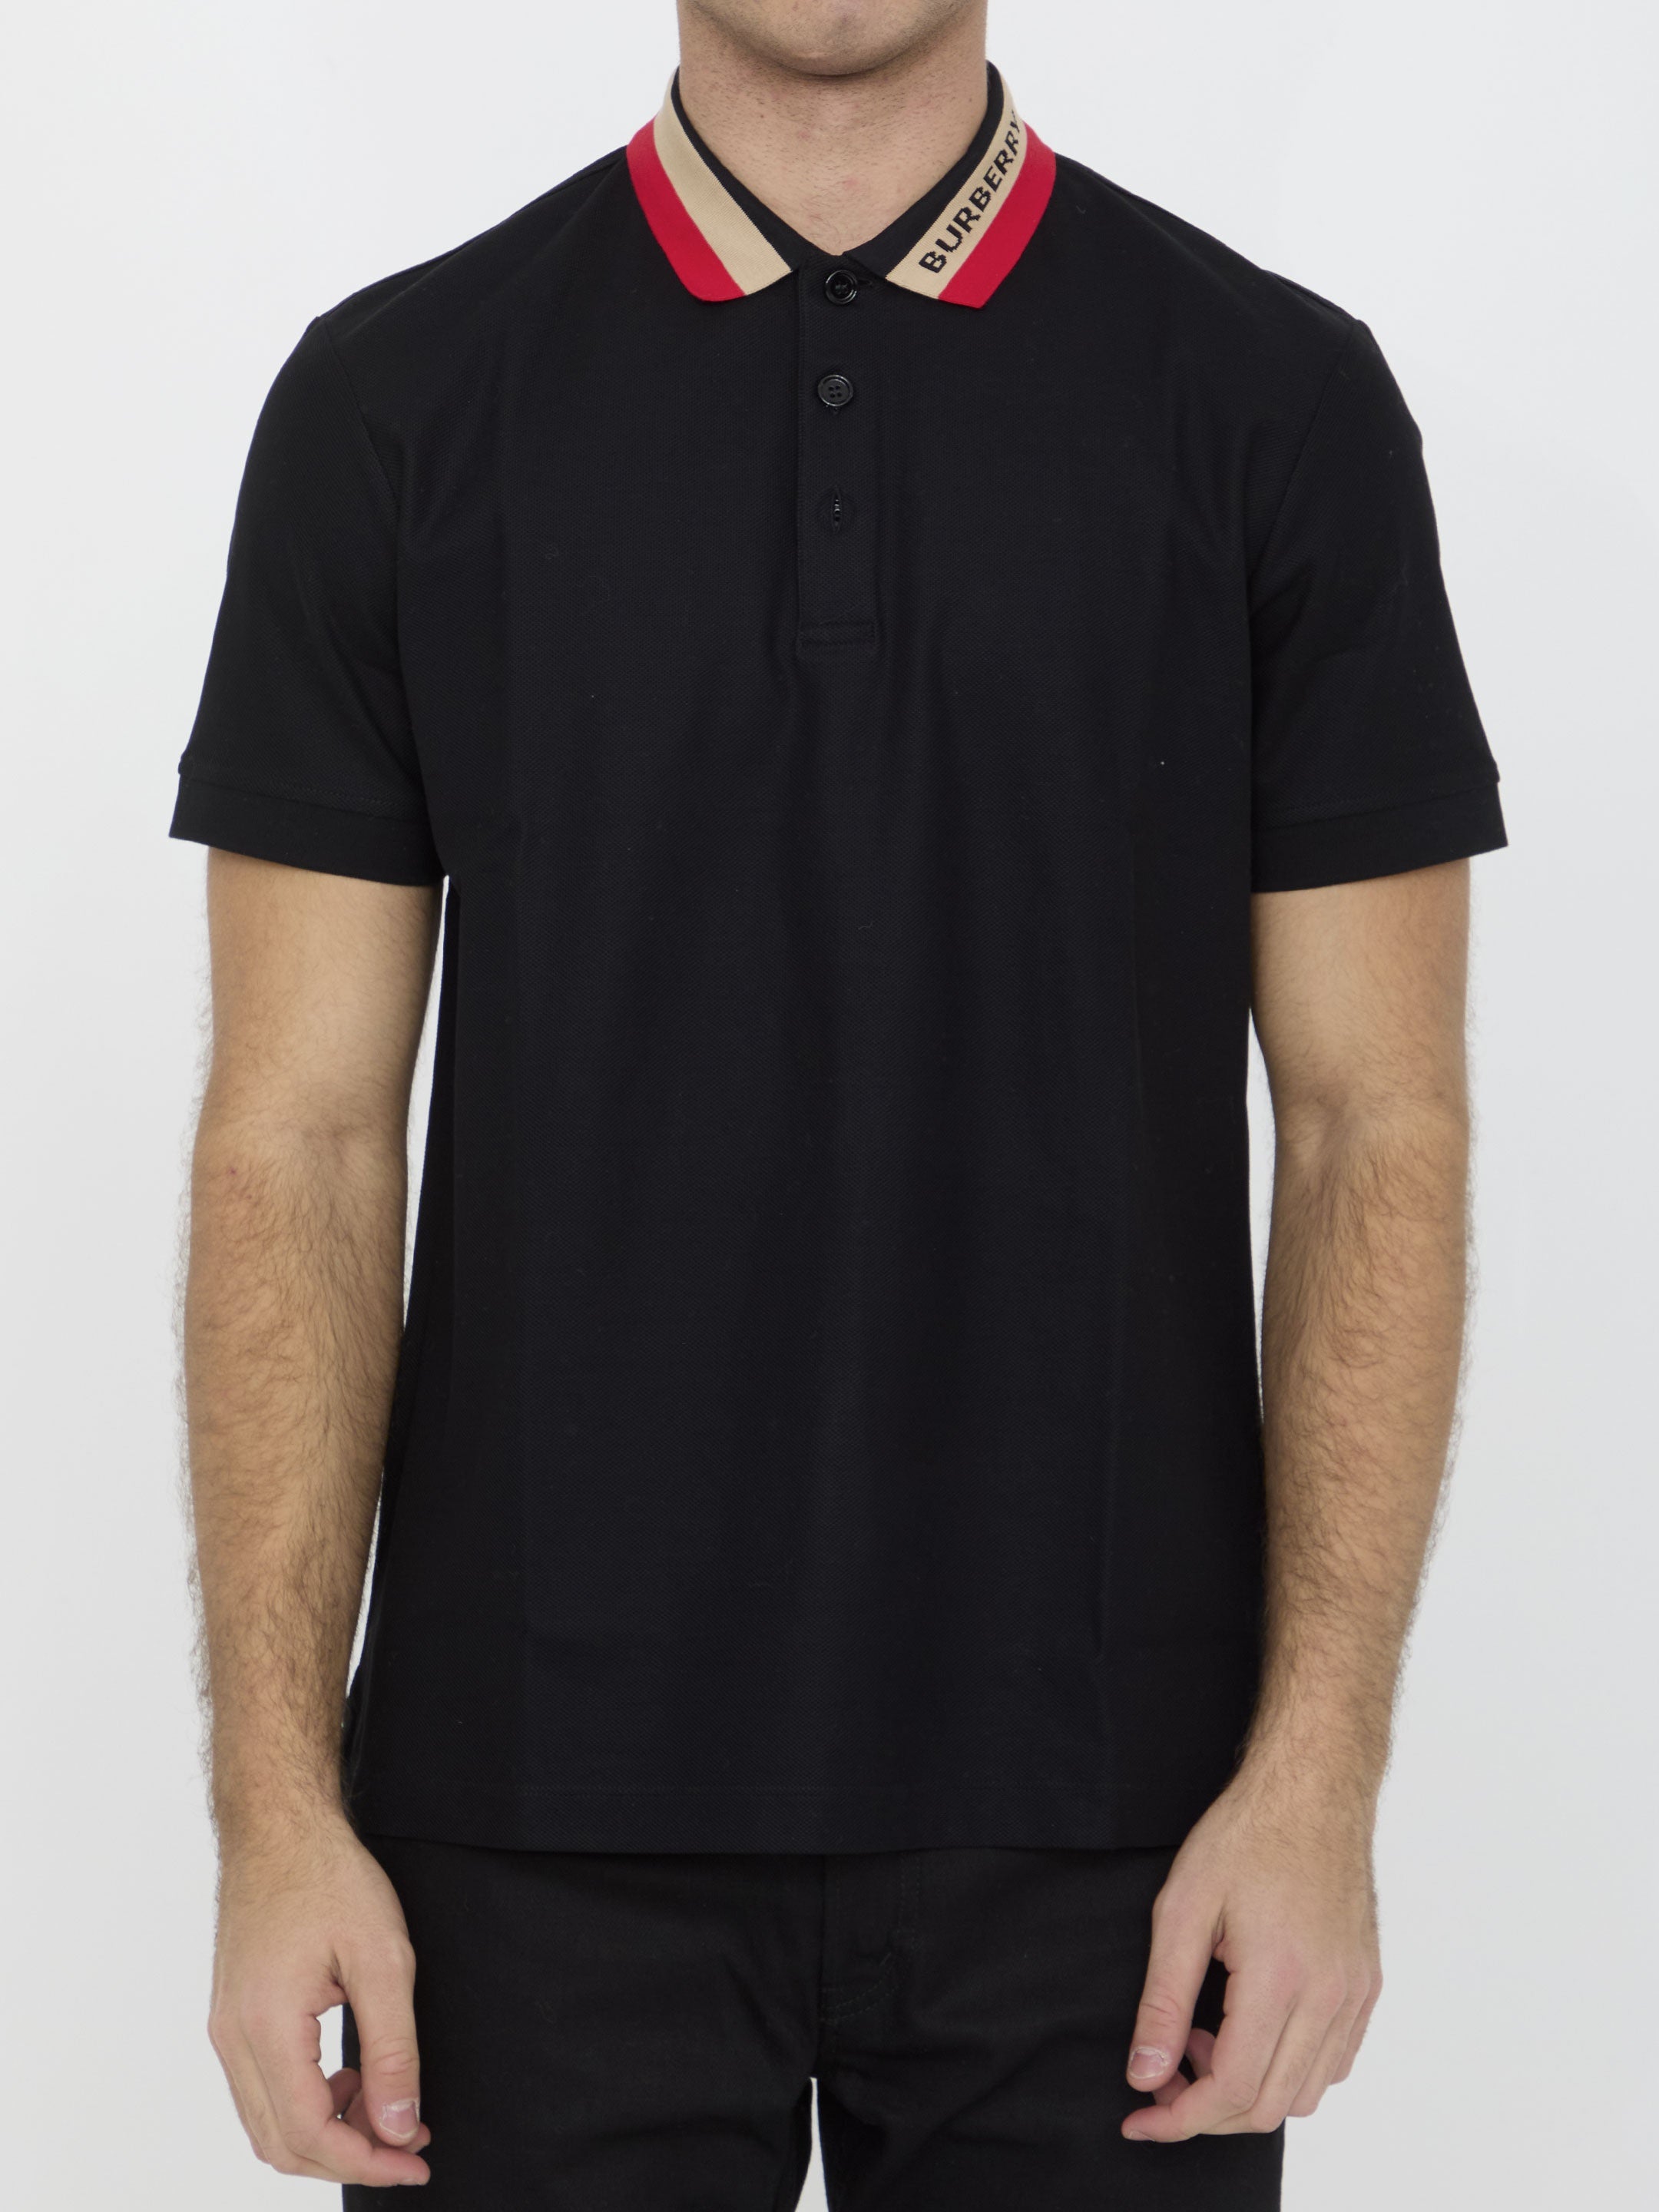 BURBERRY-OUTLET-SALE-Burberry-polo-shirt-Shirts-L-BLACK-ARCHIVE-COLLECTION.jpg